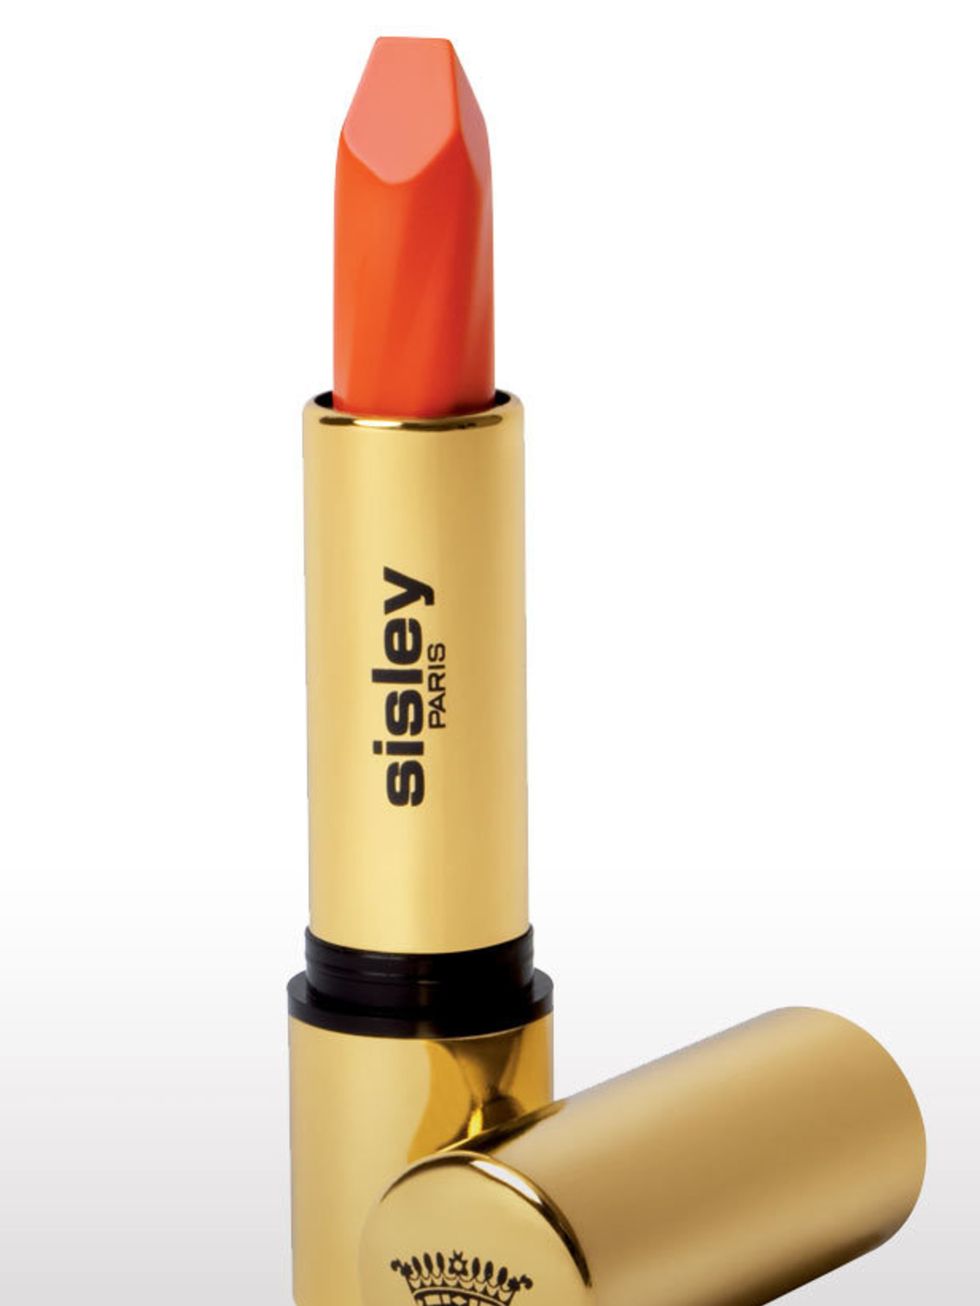 <p>Orange lips were all over the s/s catwalks most notably at Prada. Take inspiration from Miuccias models and opt for a bold, opaque orange like this lipstick from Sisley. Team with a tan and minimal mascara for maximum effect.</p><p> Lipstick in Mandar